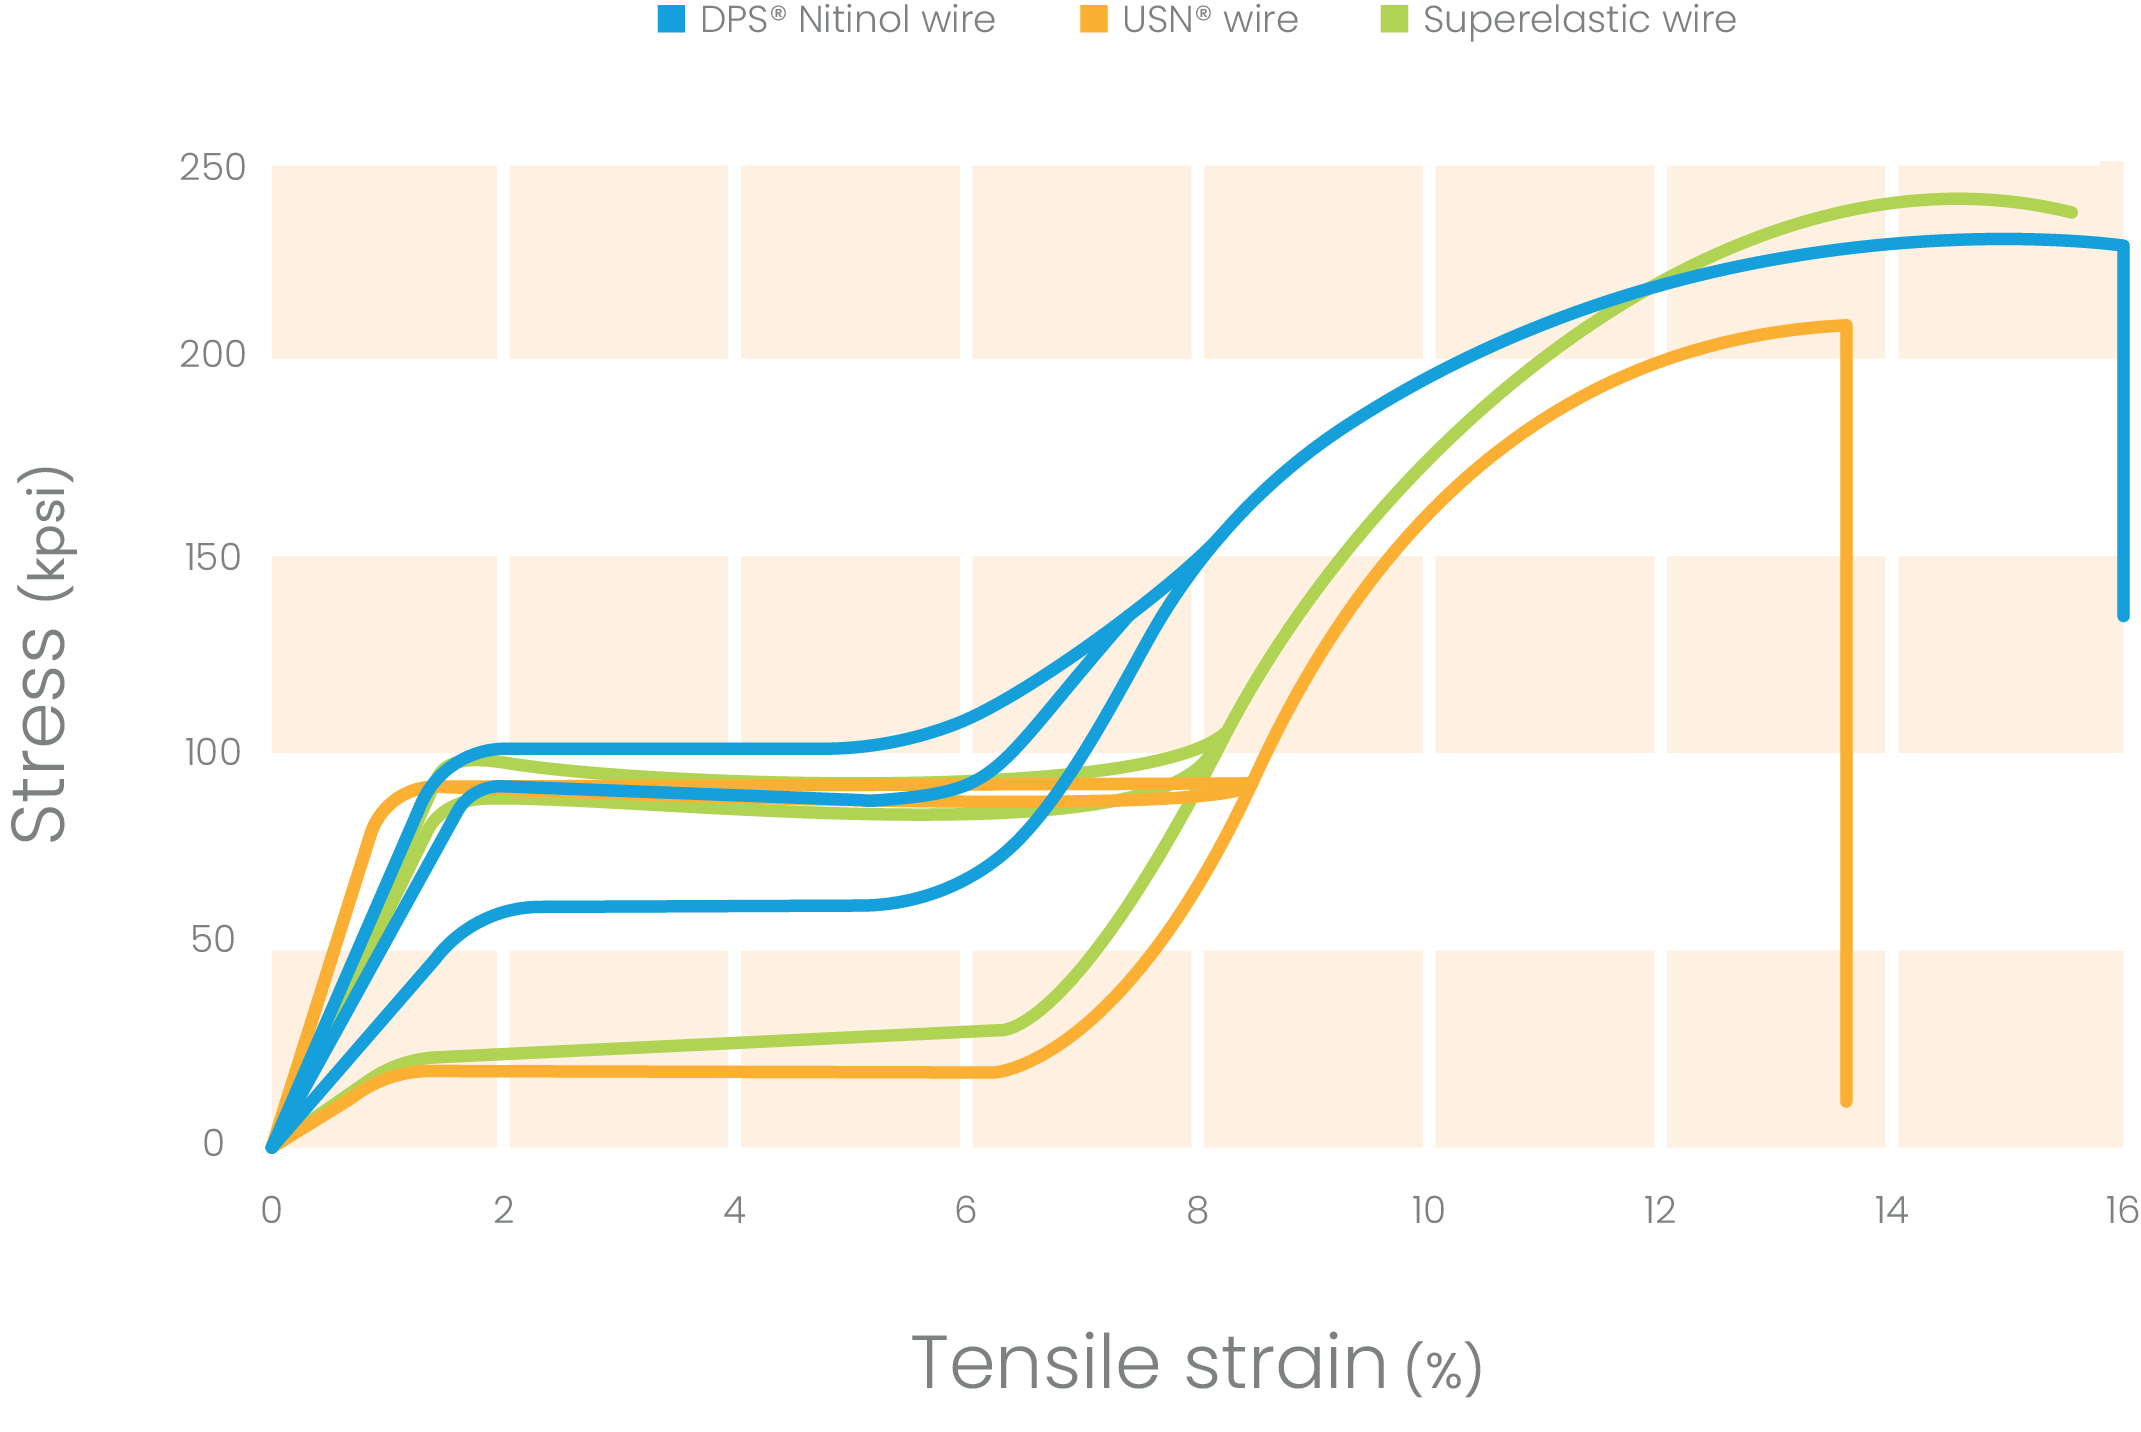 Line graph comparing the stress and strain performance of DPS® Nitinol wire, USN® wire, and Superelastic Nitinol